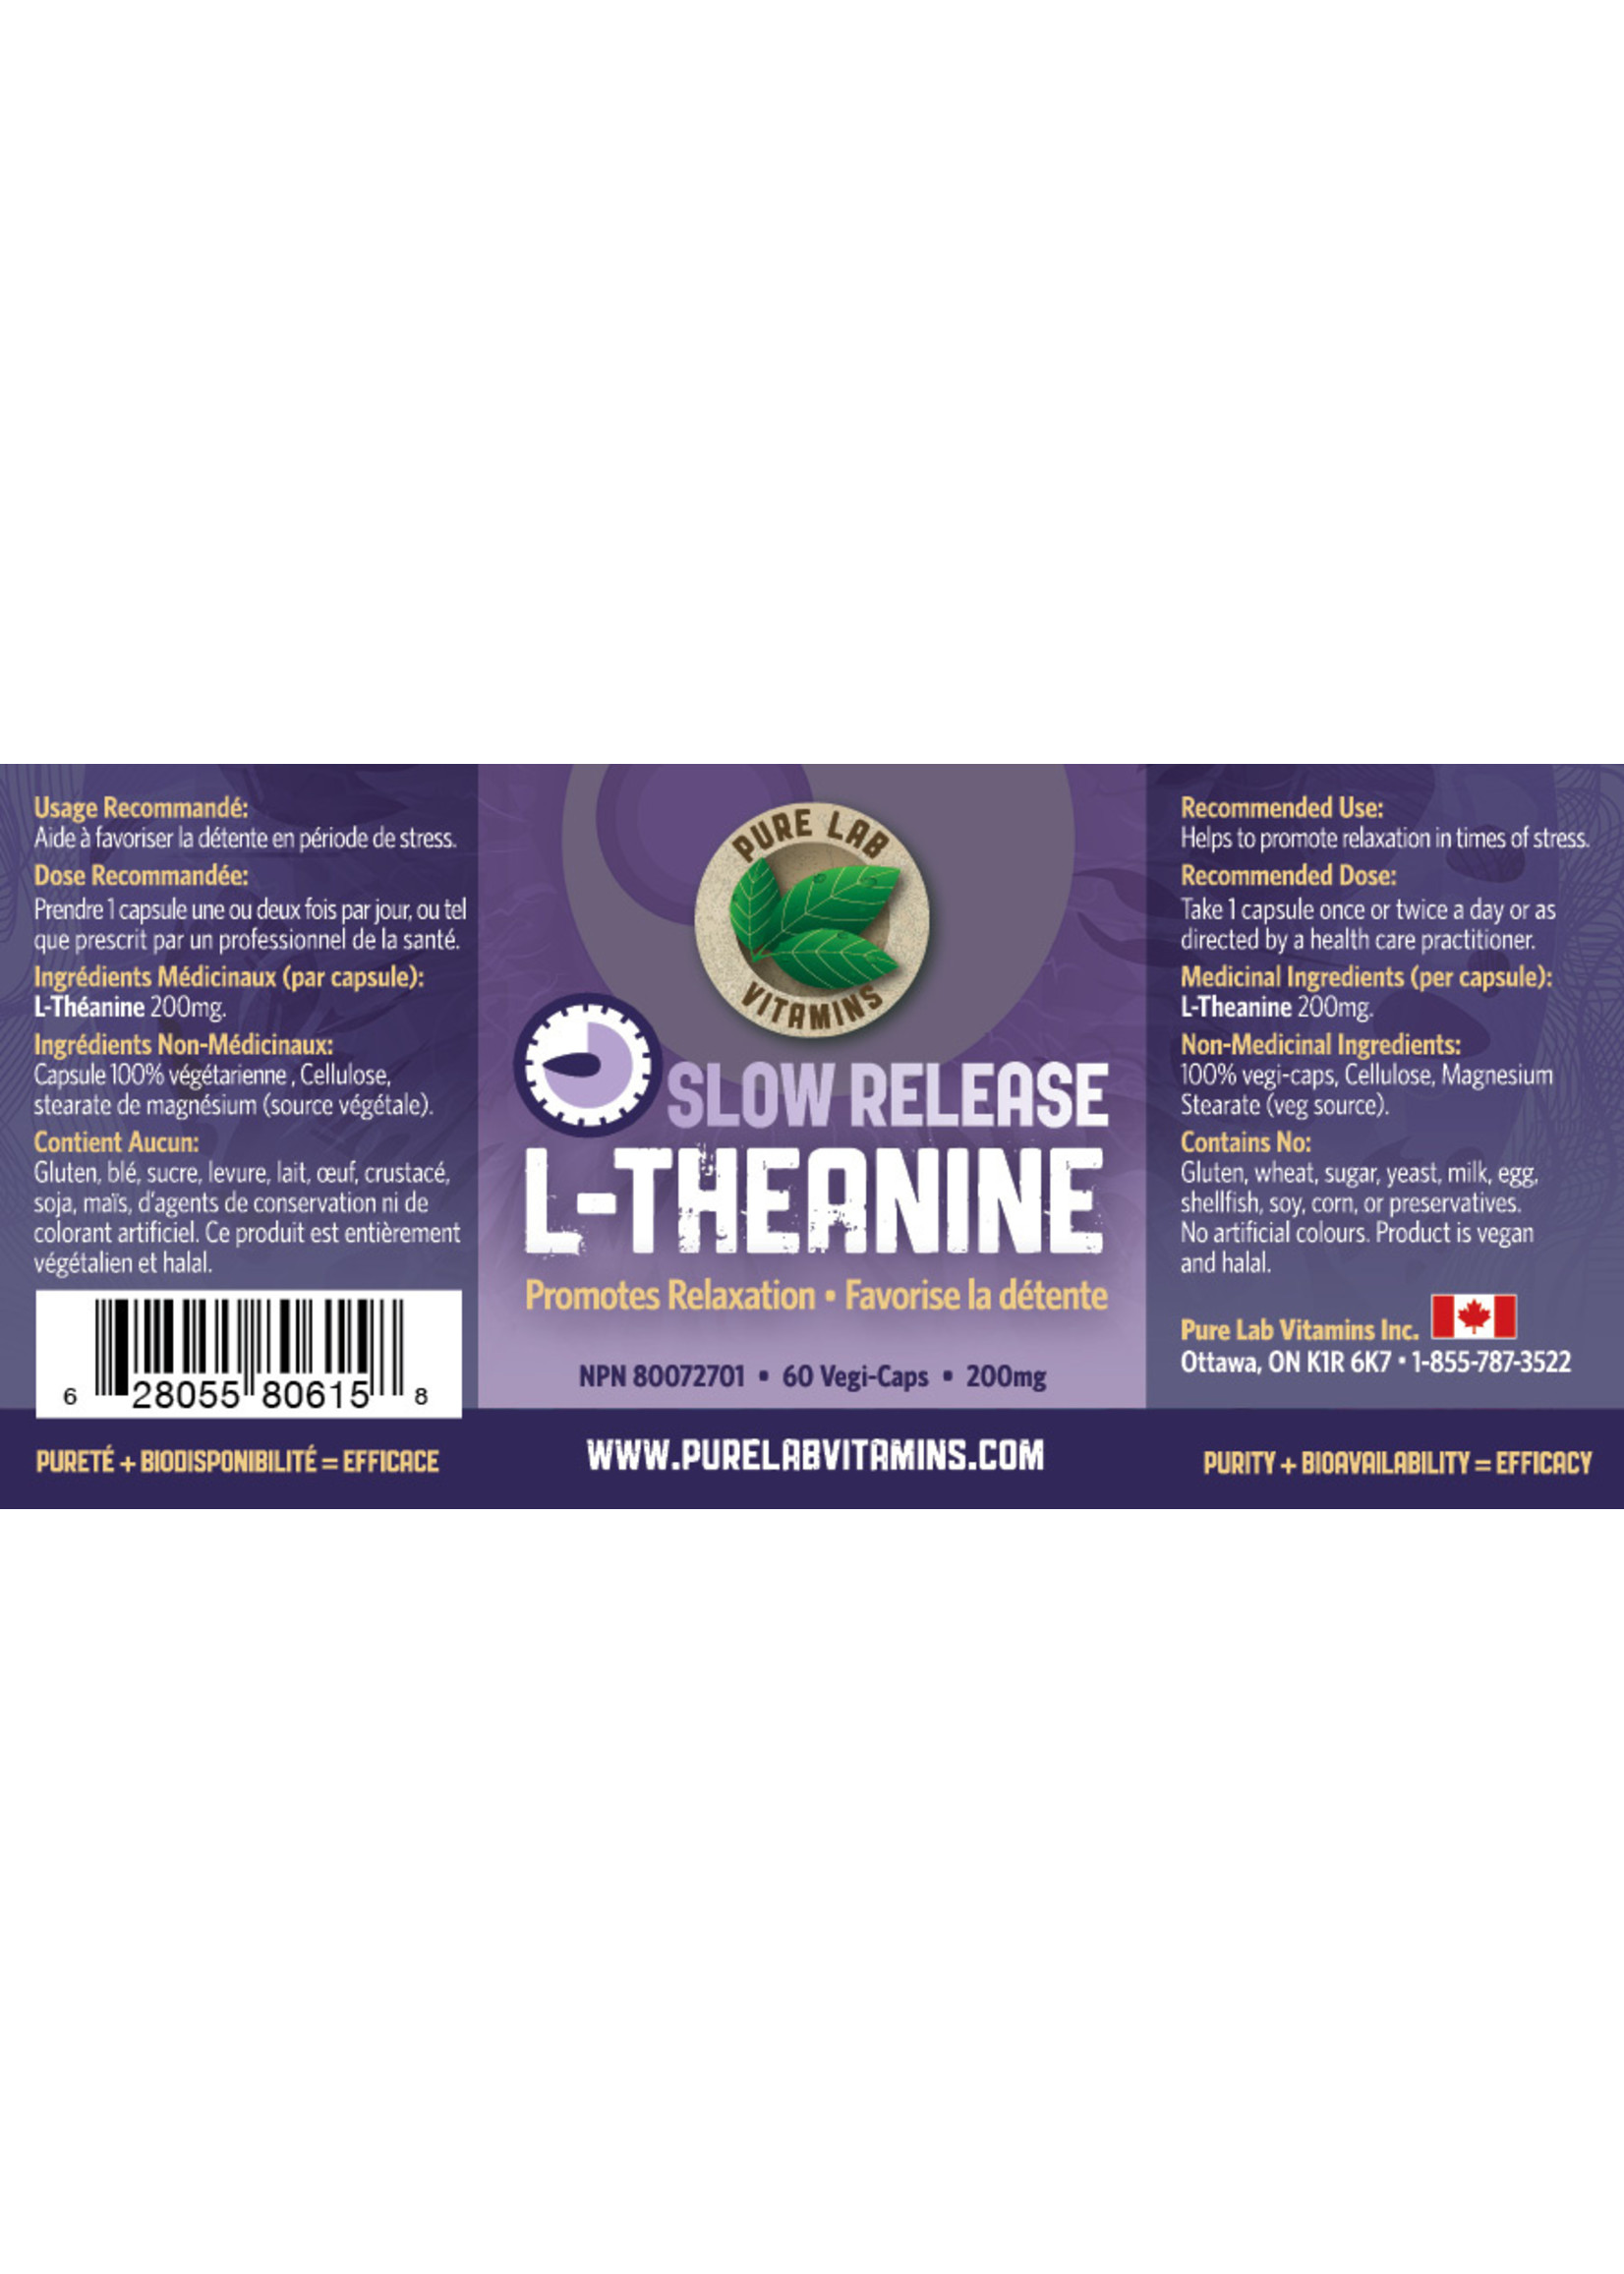 Pure lab Pure Lab L-Theanine Slow Release 200mg